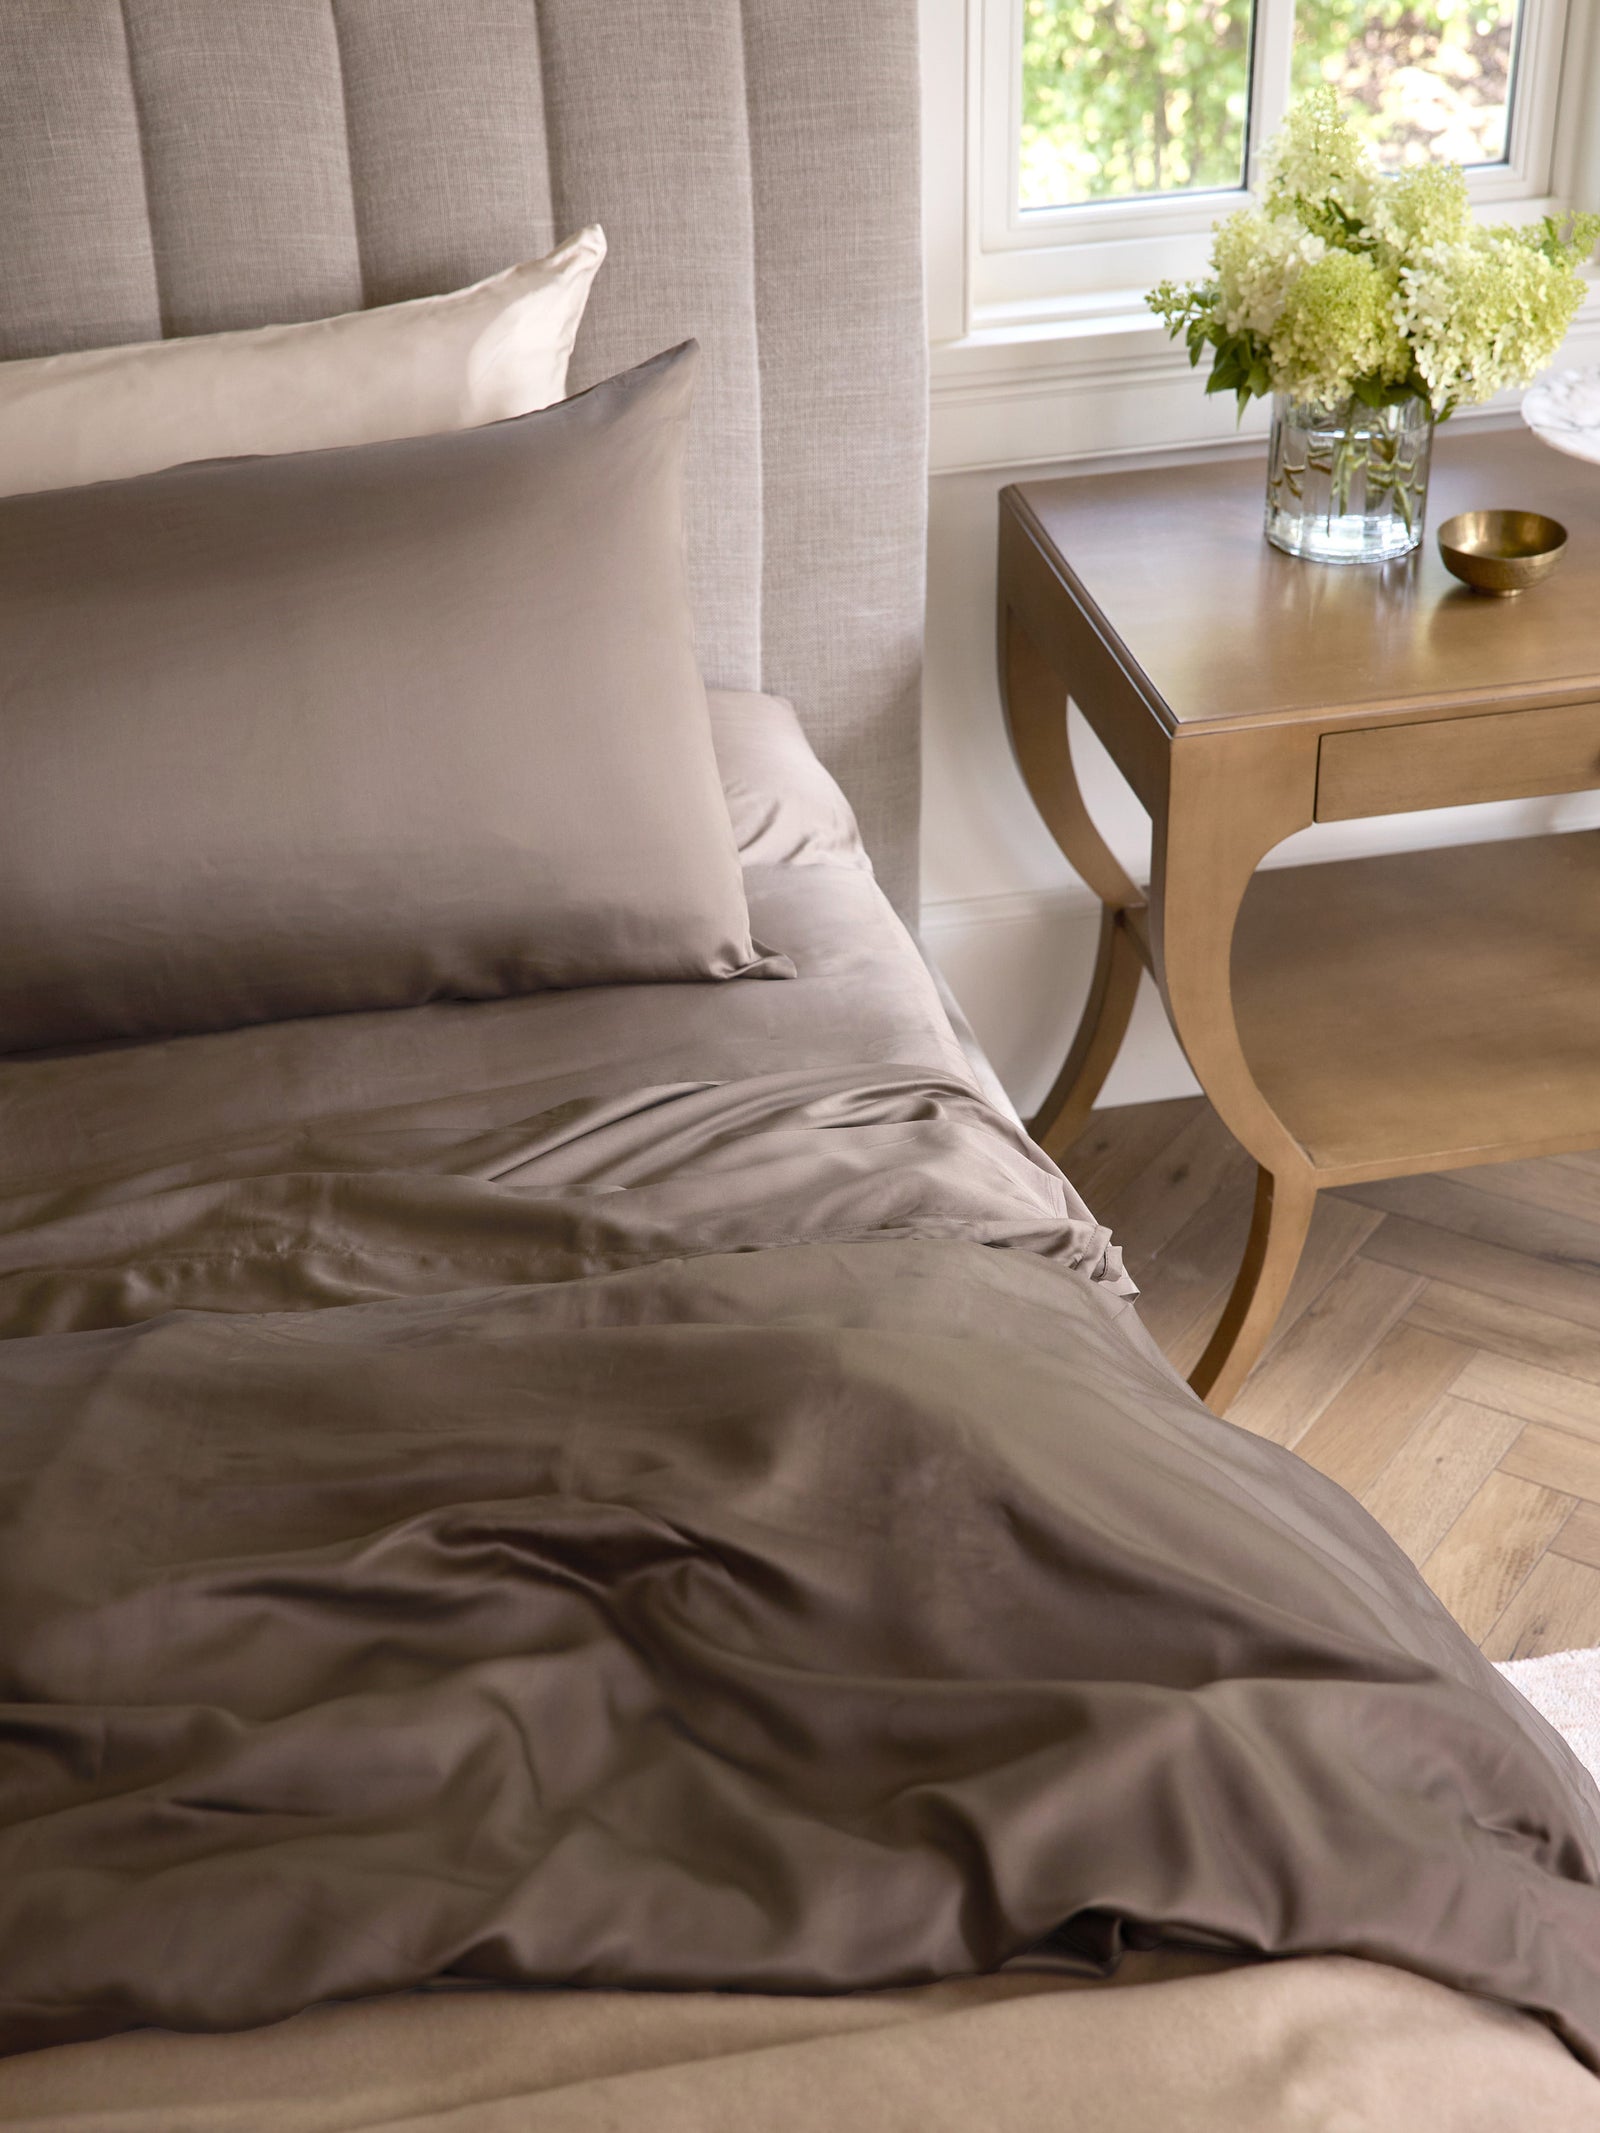 Walnut bedding with a wooden night stand to the side 